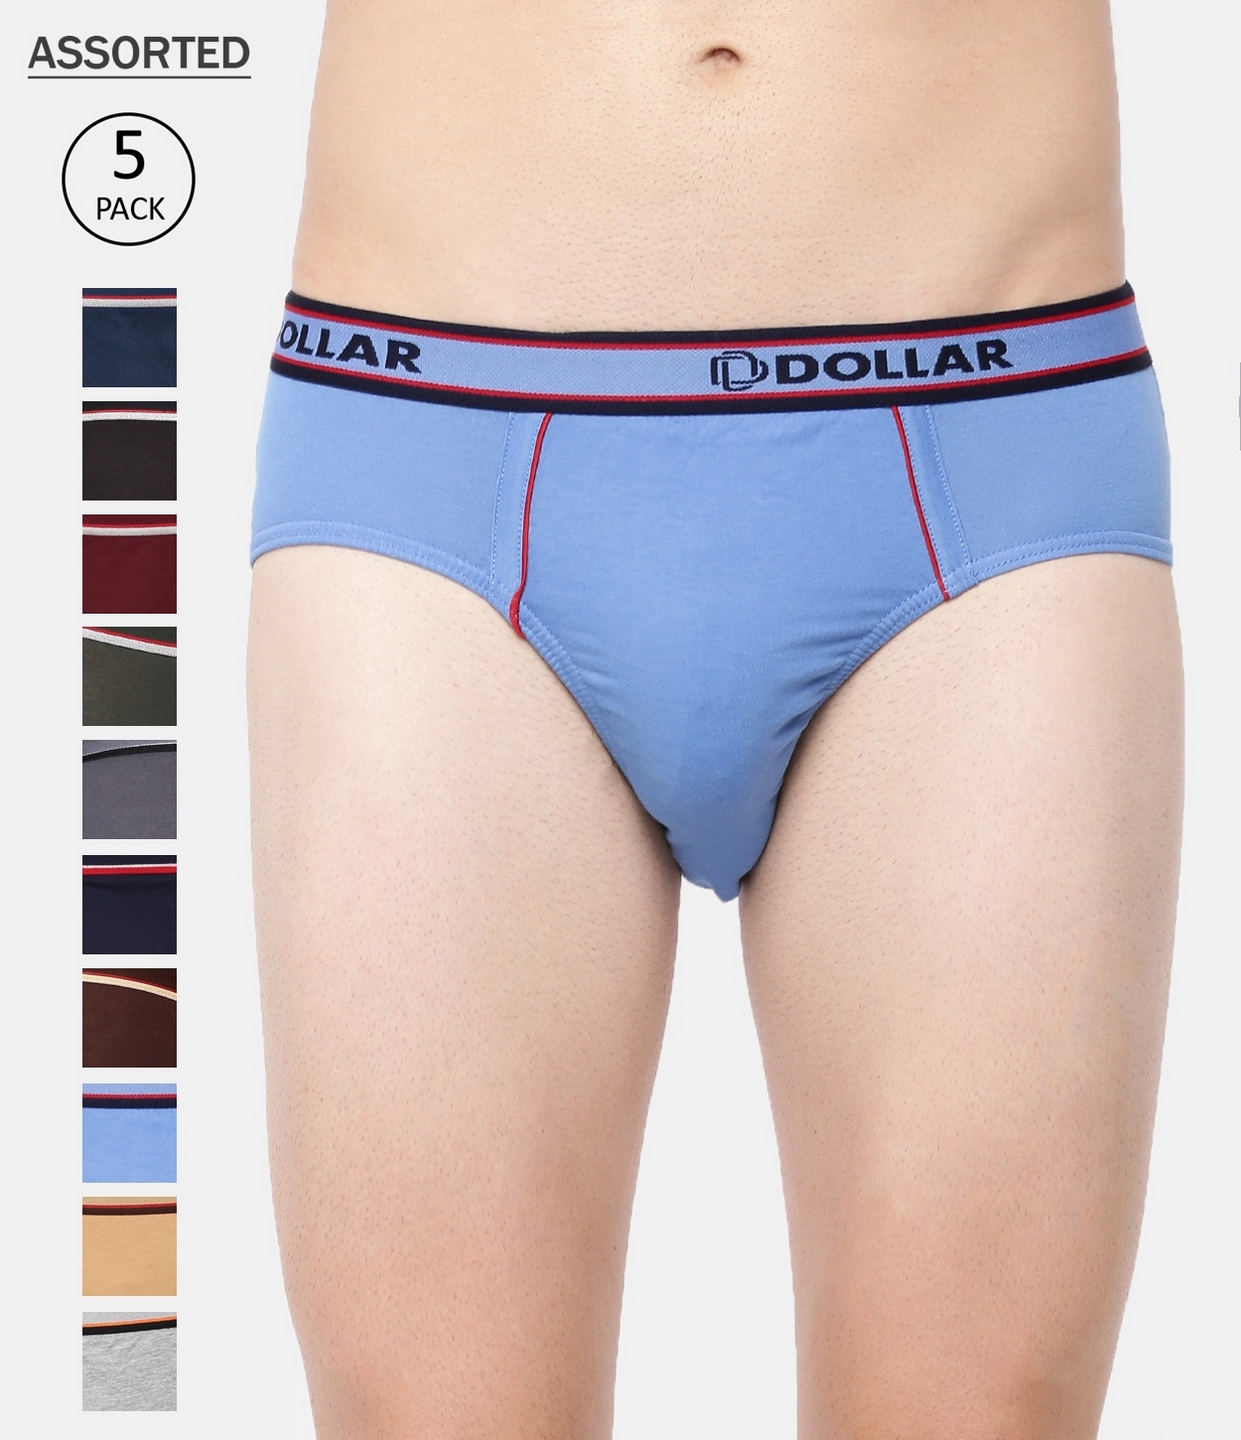 Buy Bigg Boss Men's Cotton Brief (Assorted Pack of 5)(Colors May Vary) at